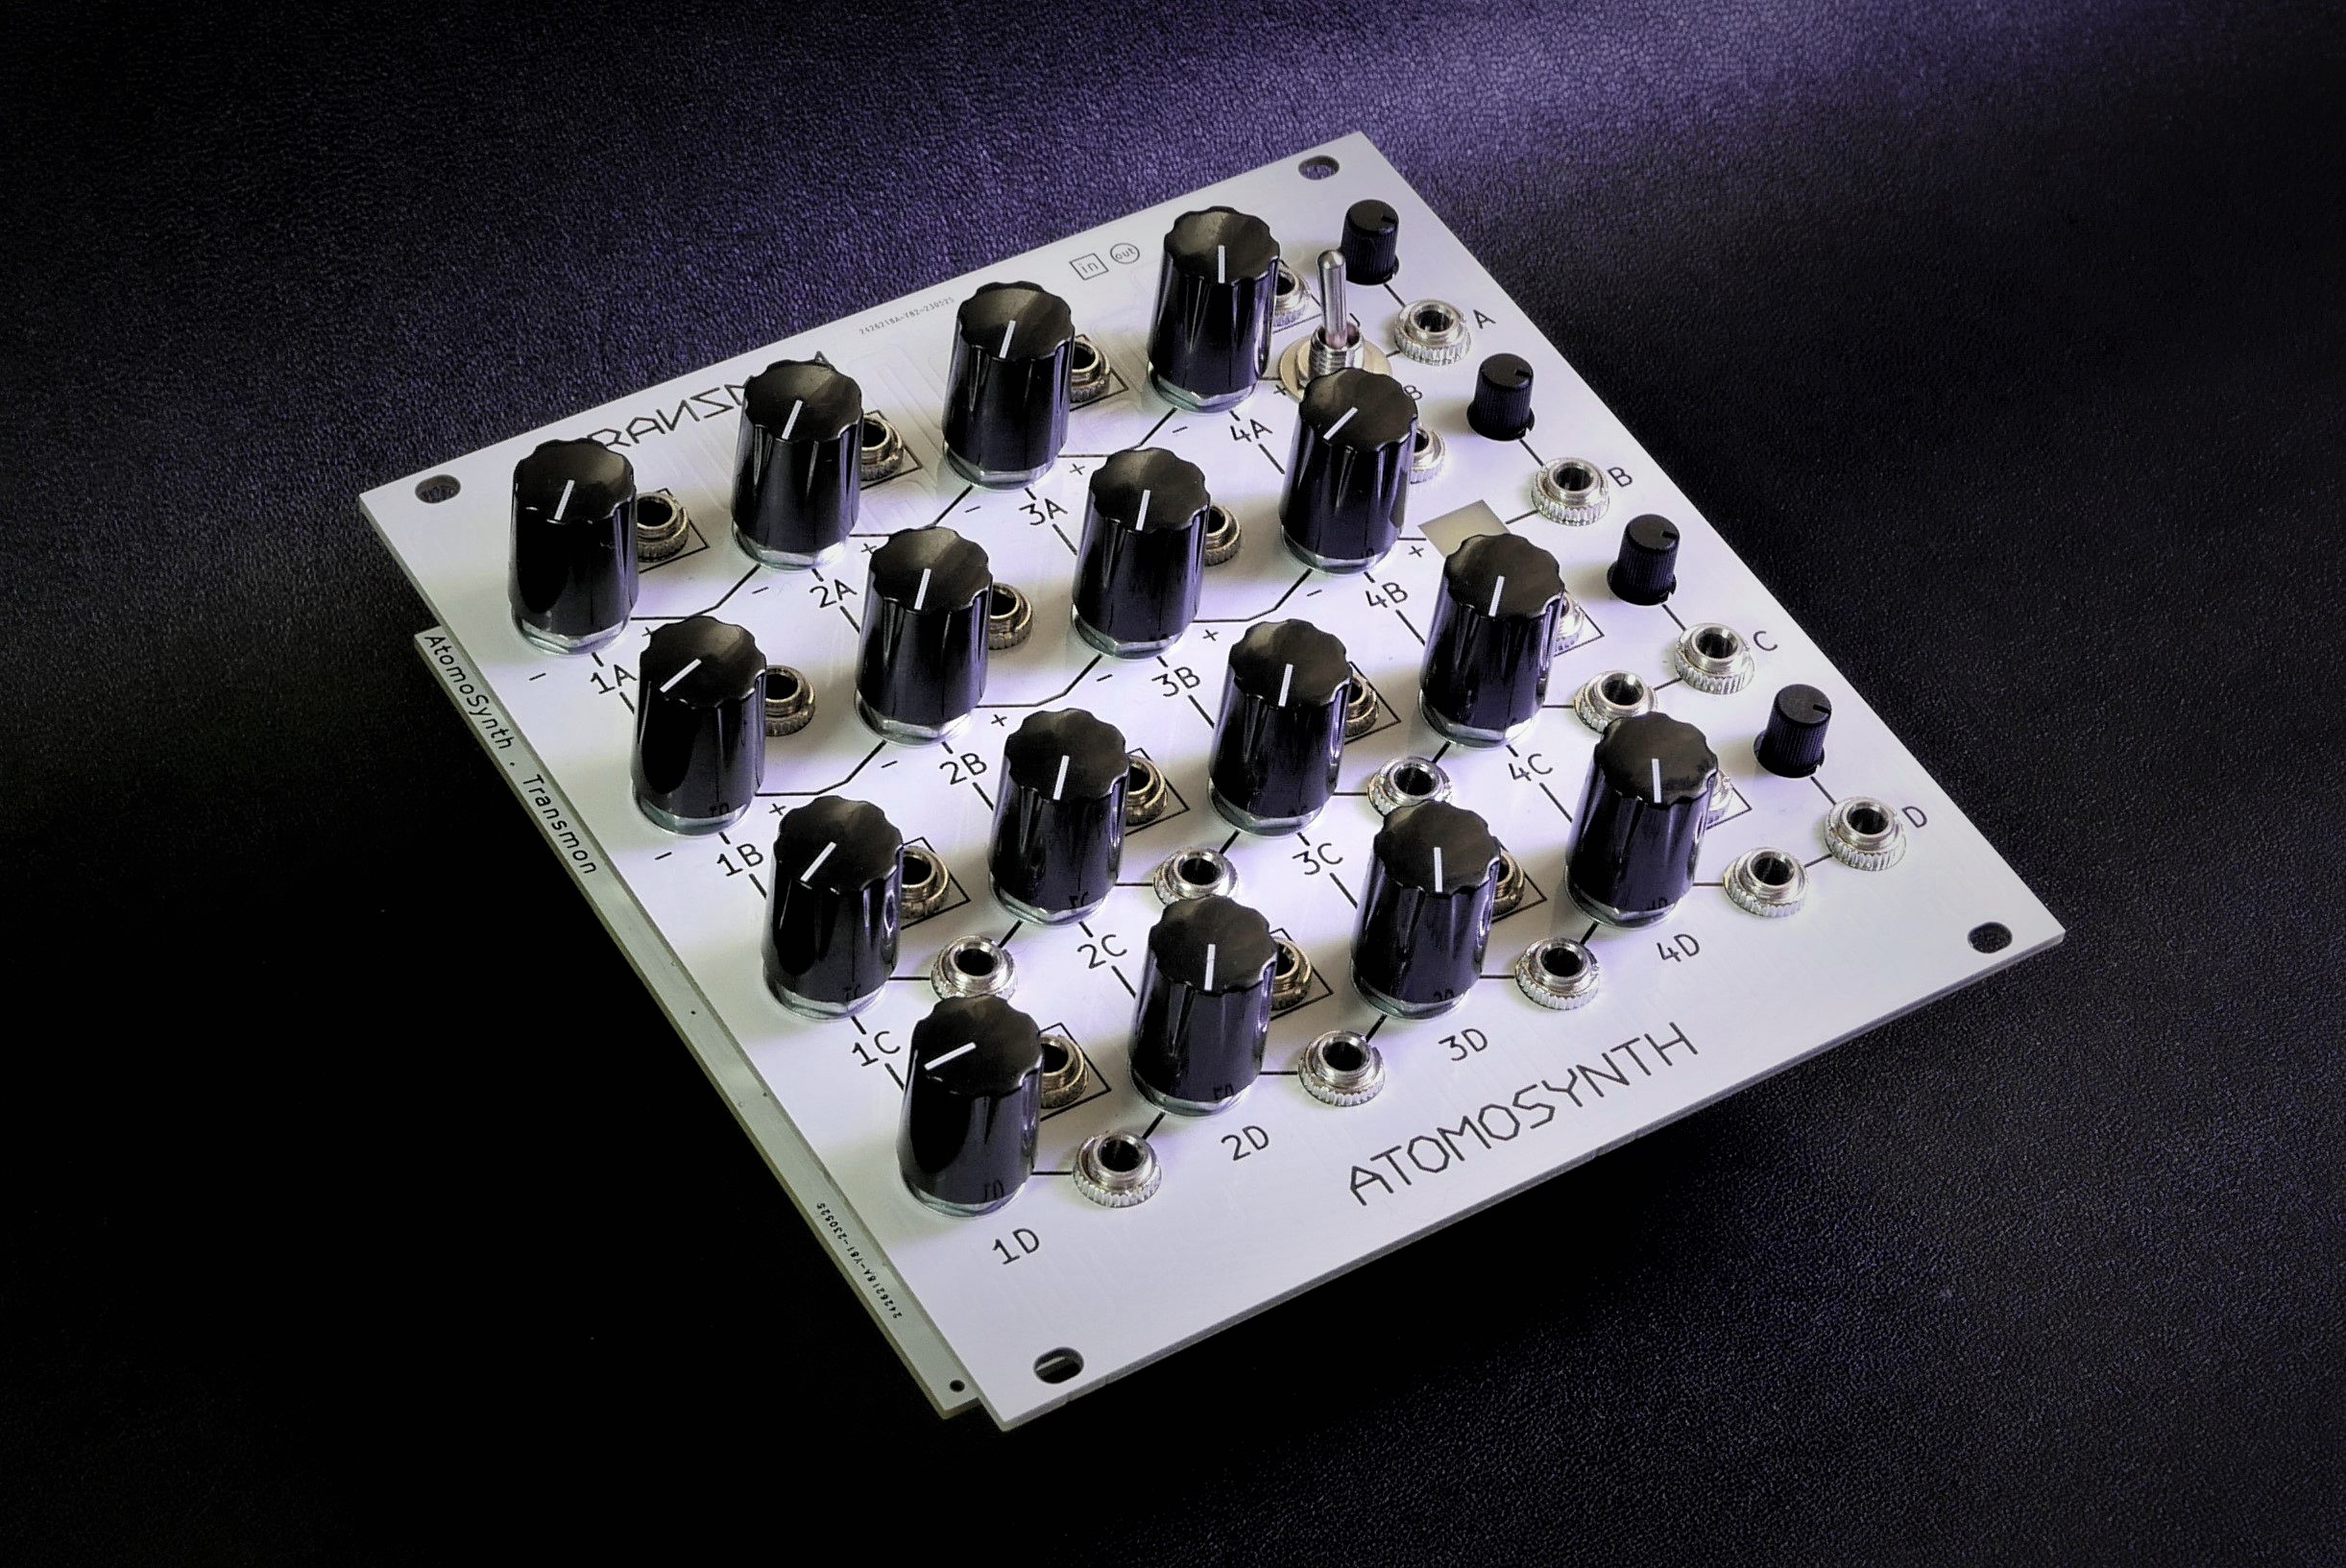 atomosynth transmon mixer and other gear picture